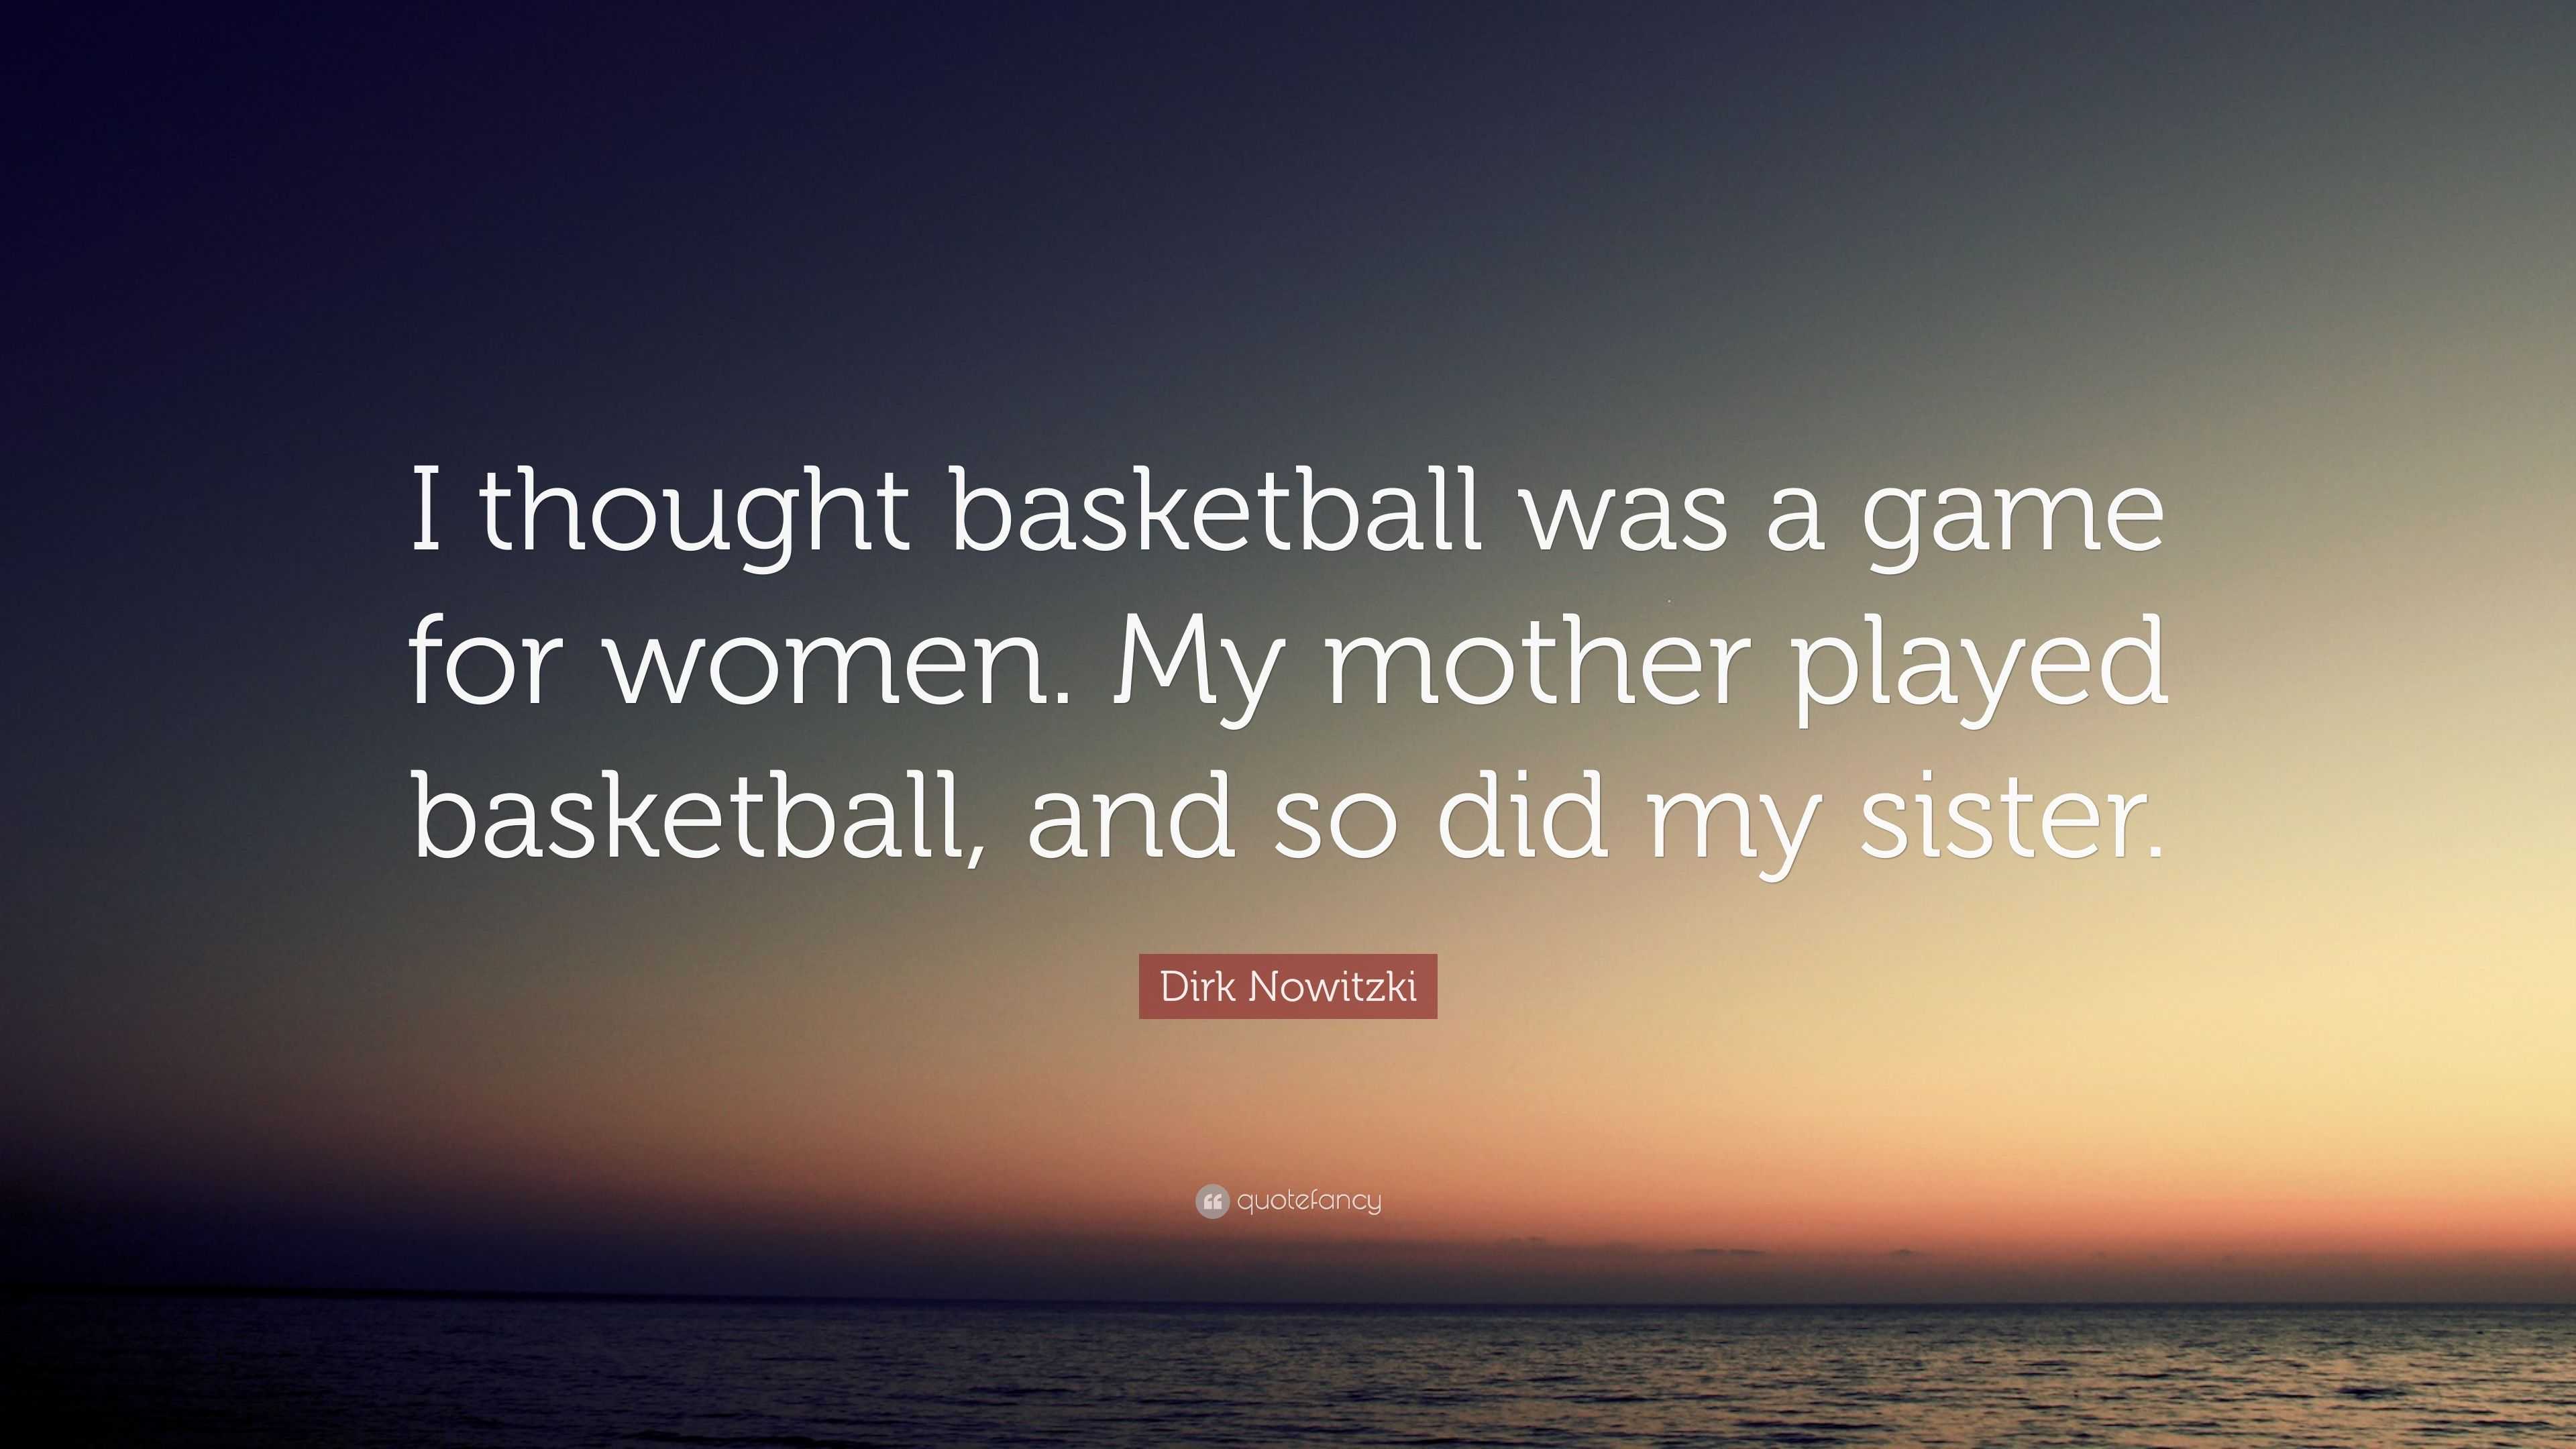 Dirk Nowitzki Quote: “I thought basketball was a game for women. My